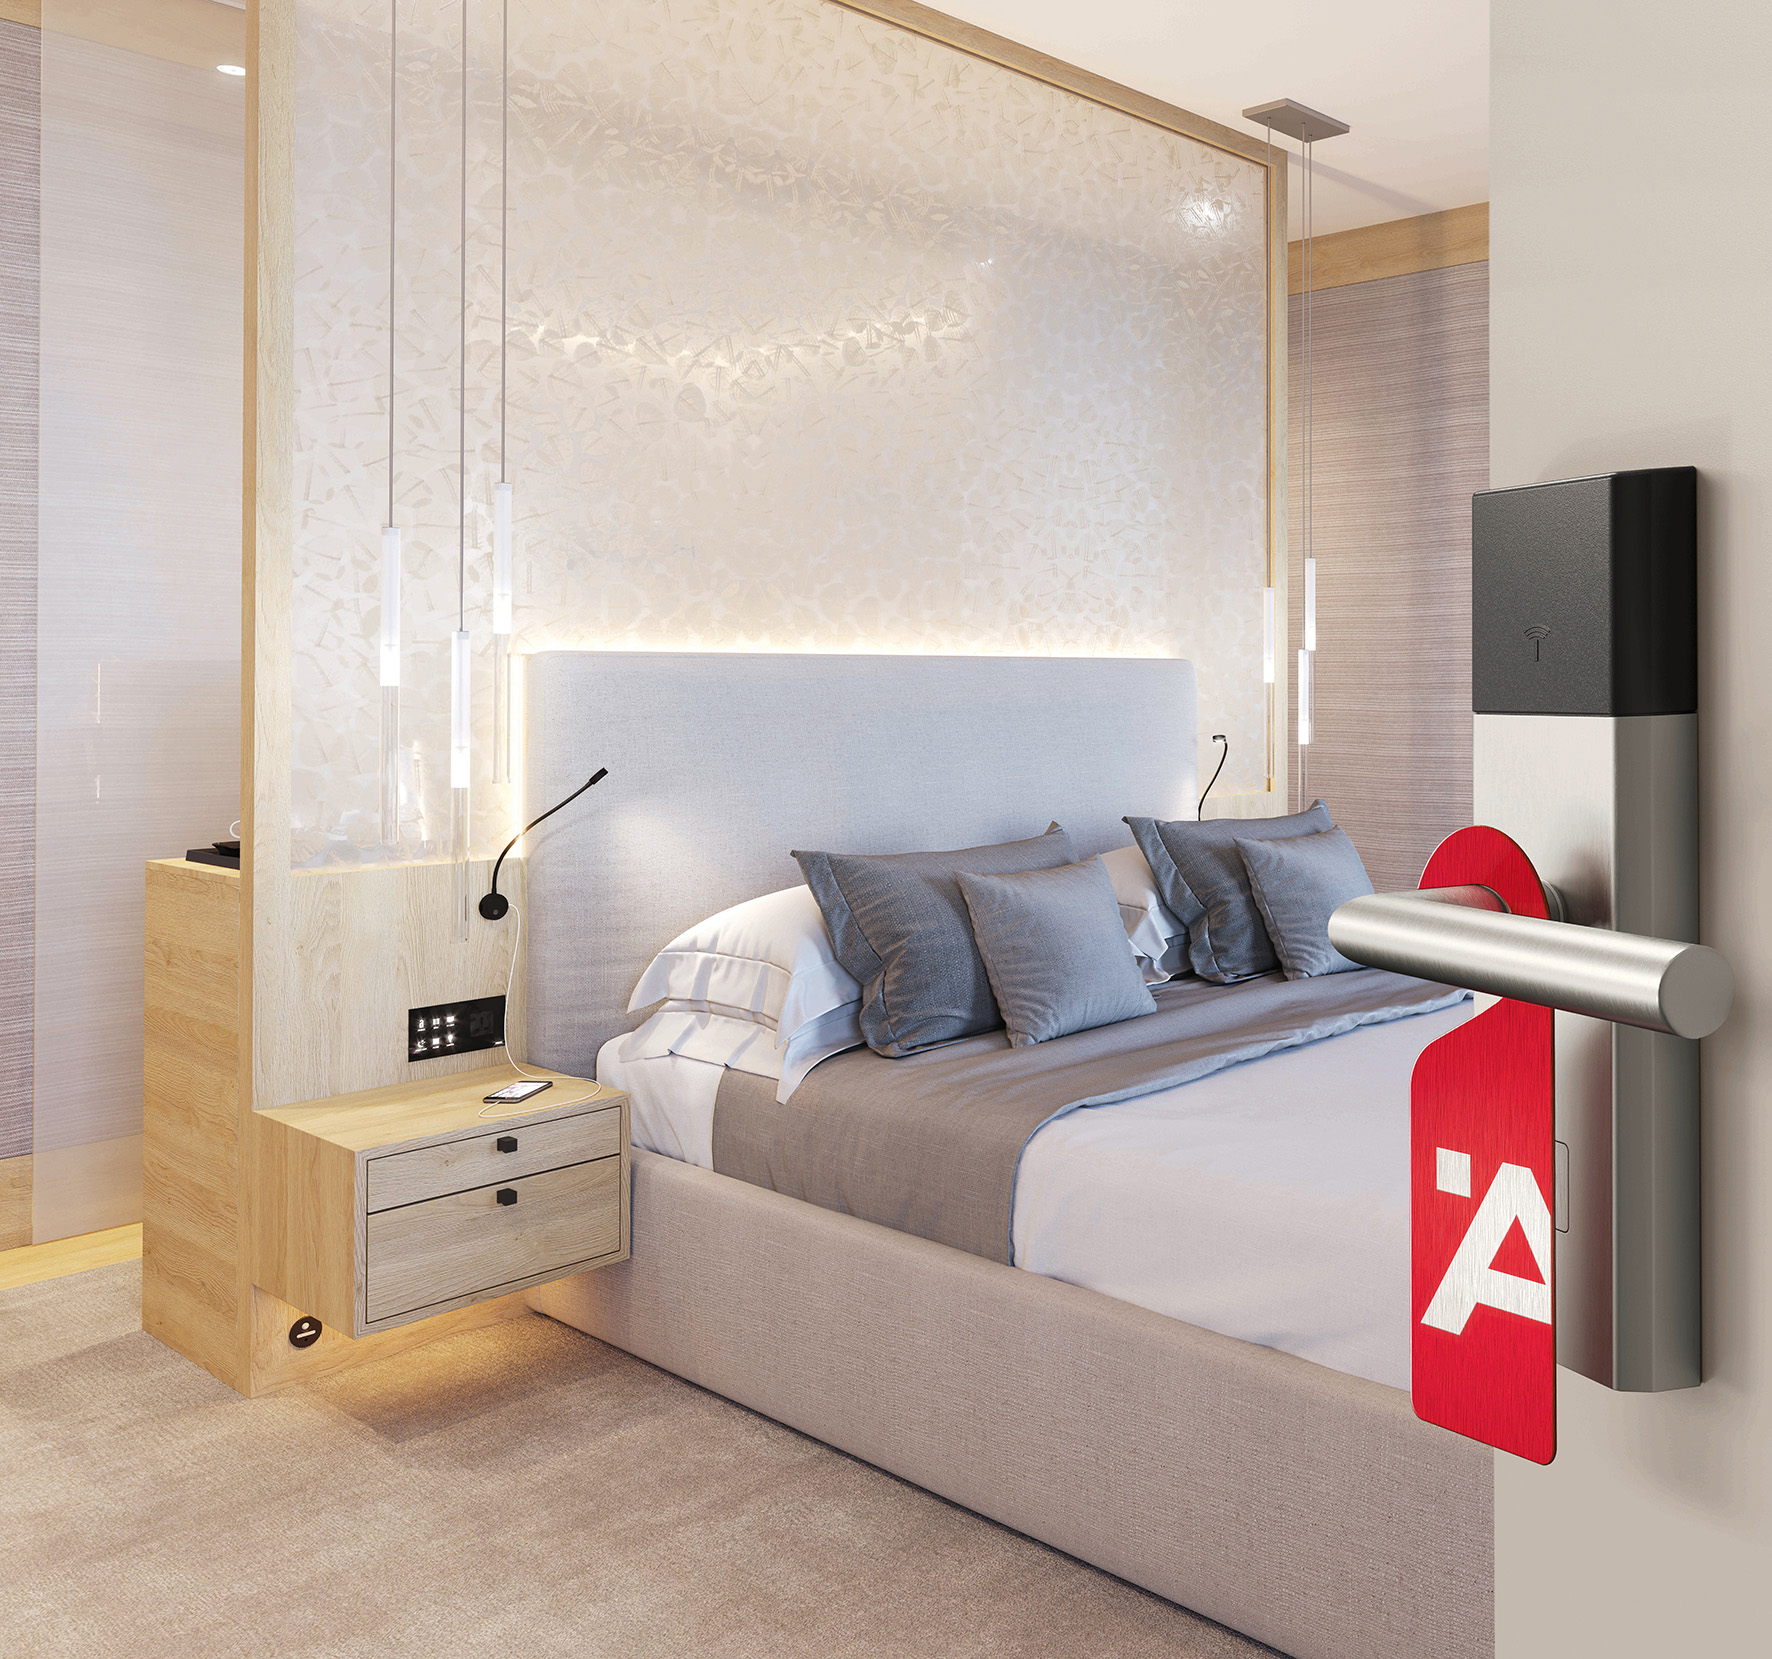 One Room, one Face – one Style. Häfele creates the optimal conditions for target group-oriented furnishing of hotel rooms with its comprehensive, internationally available hotel assortment, which contains more than 200 products.